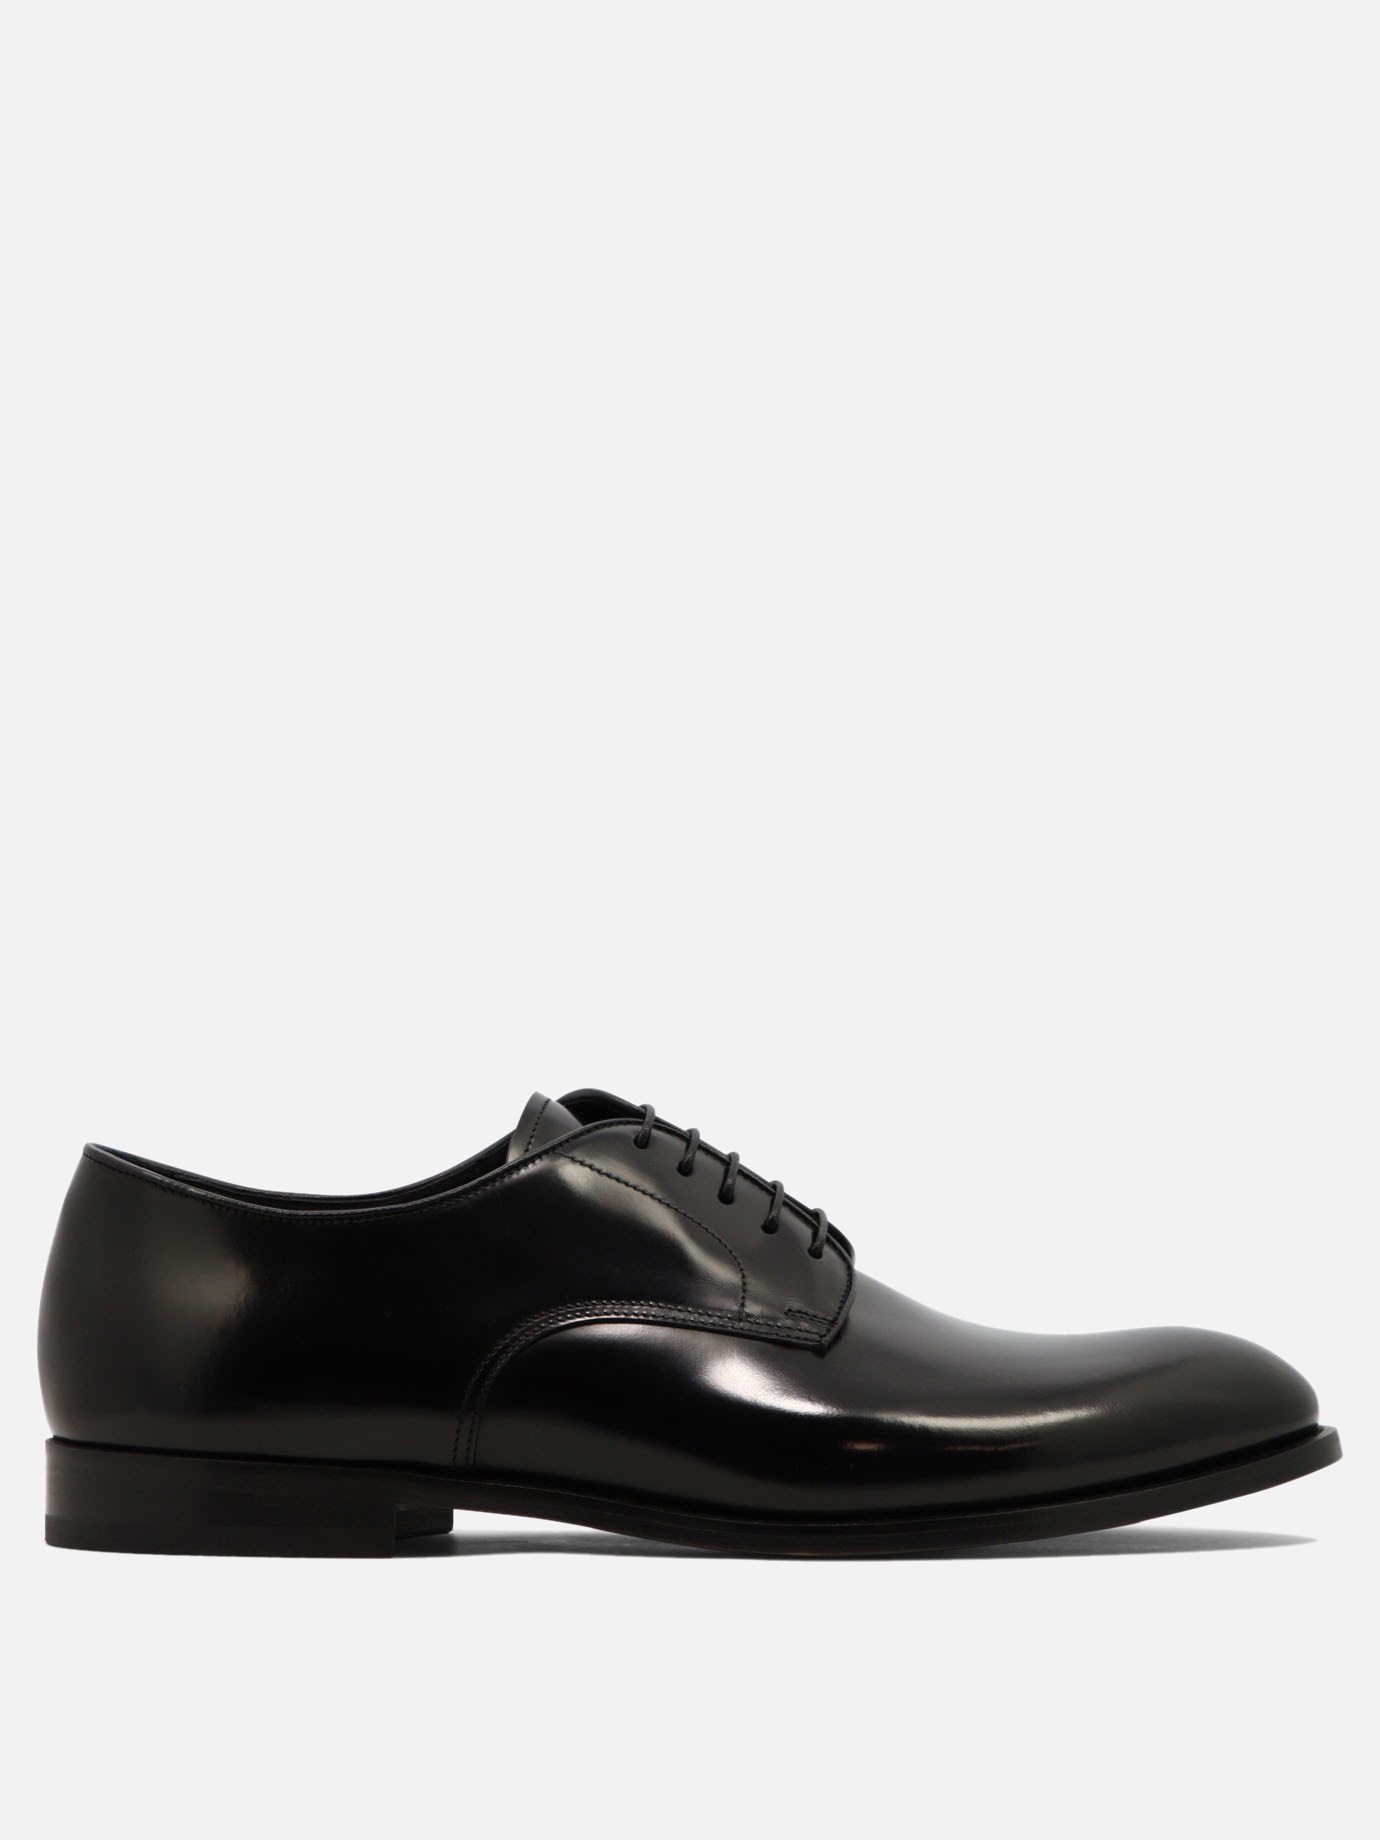  Derby  lace-up shoesby Doucal's - 5